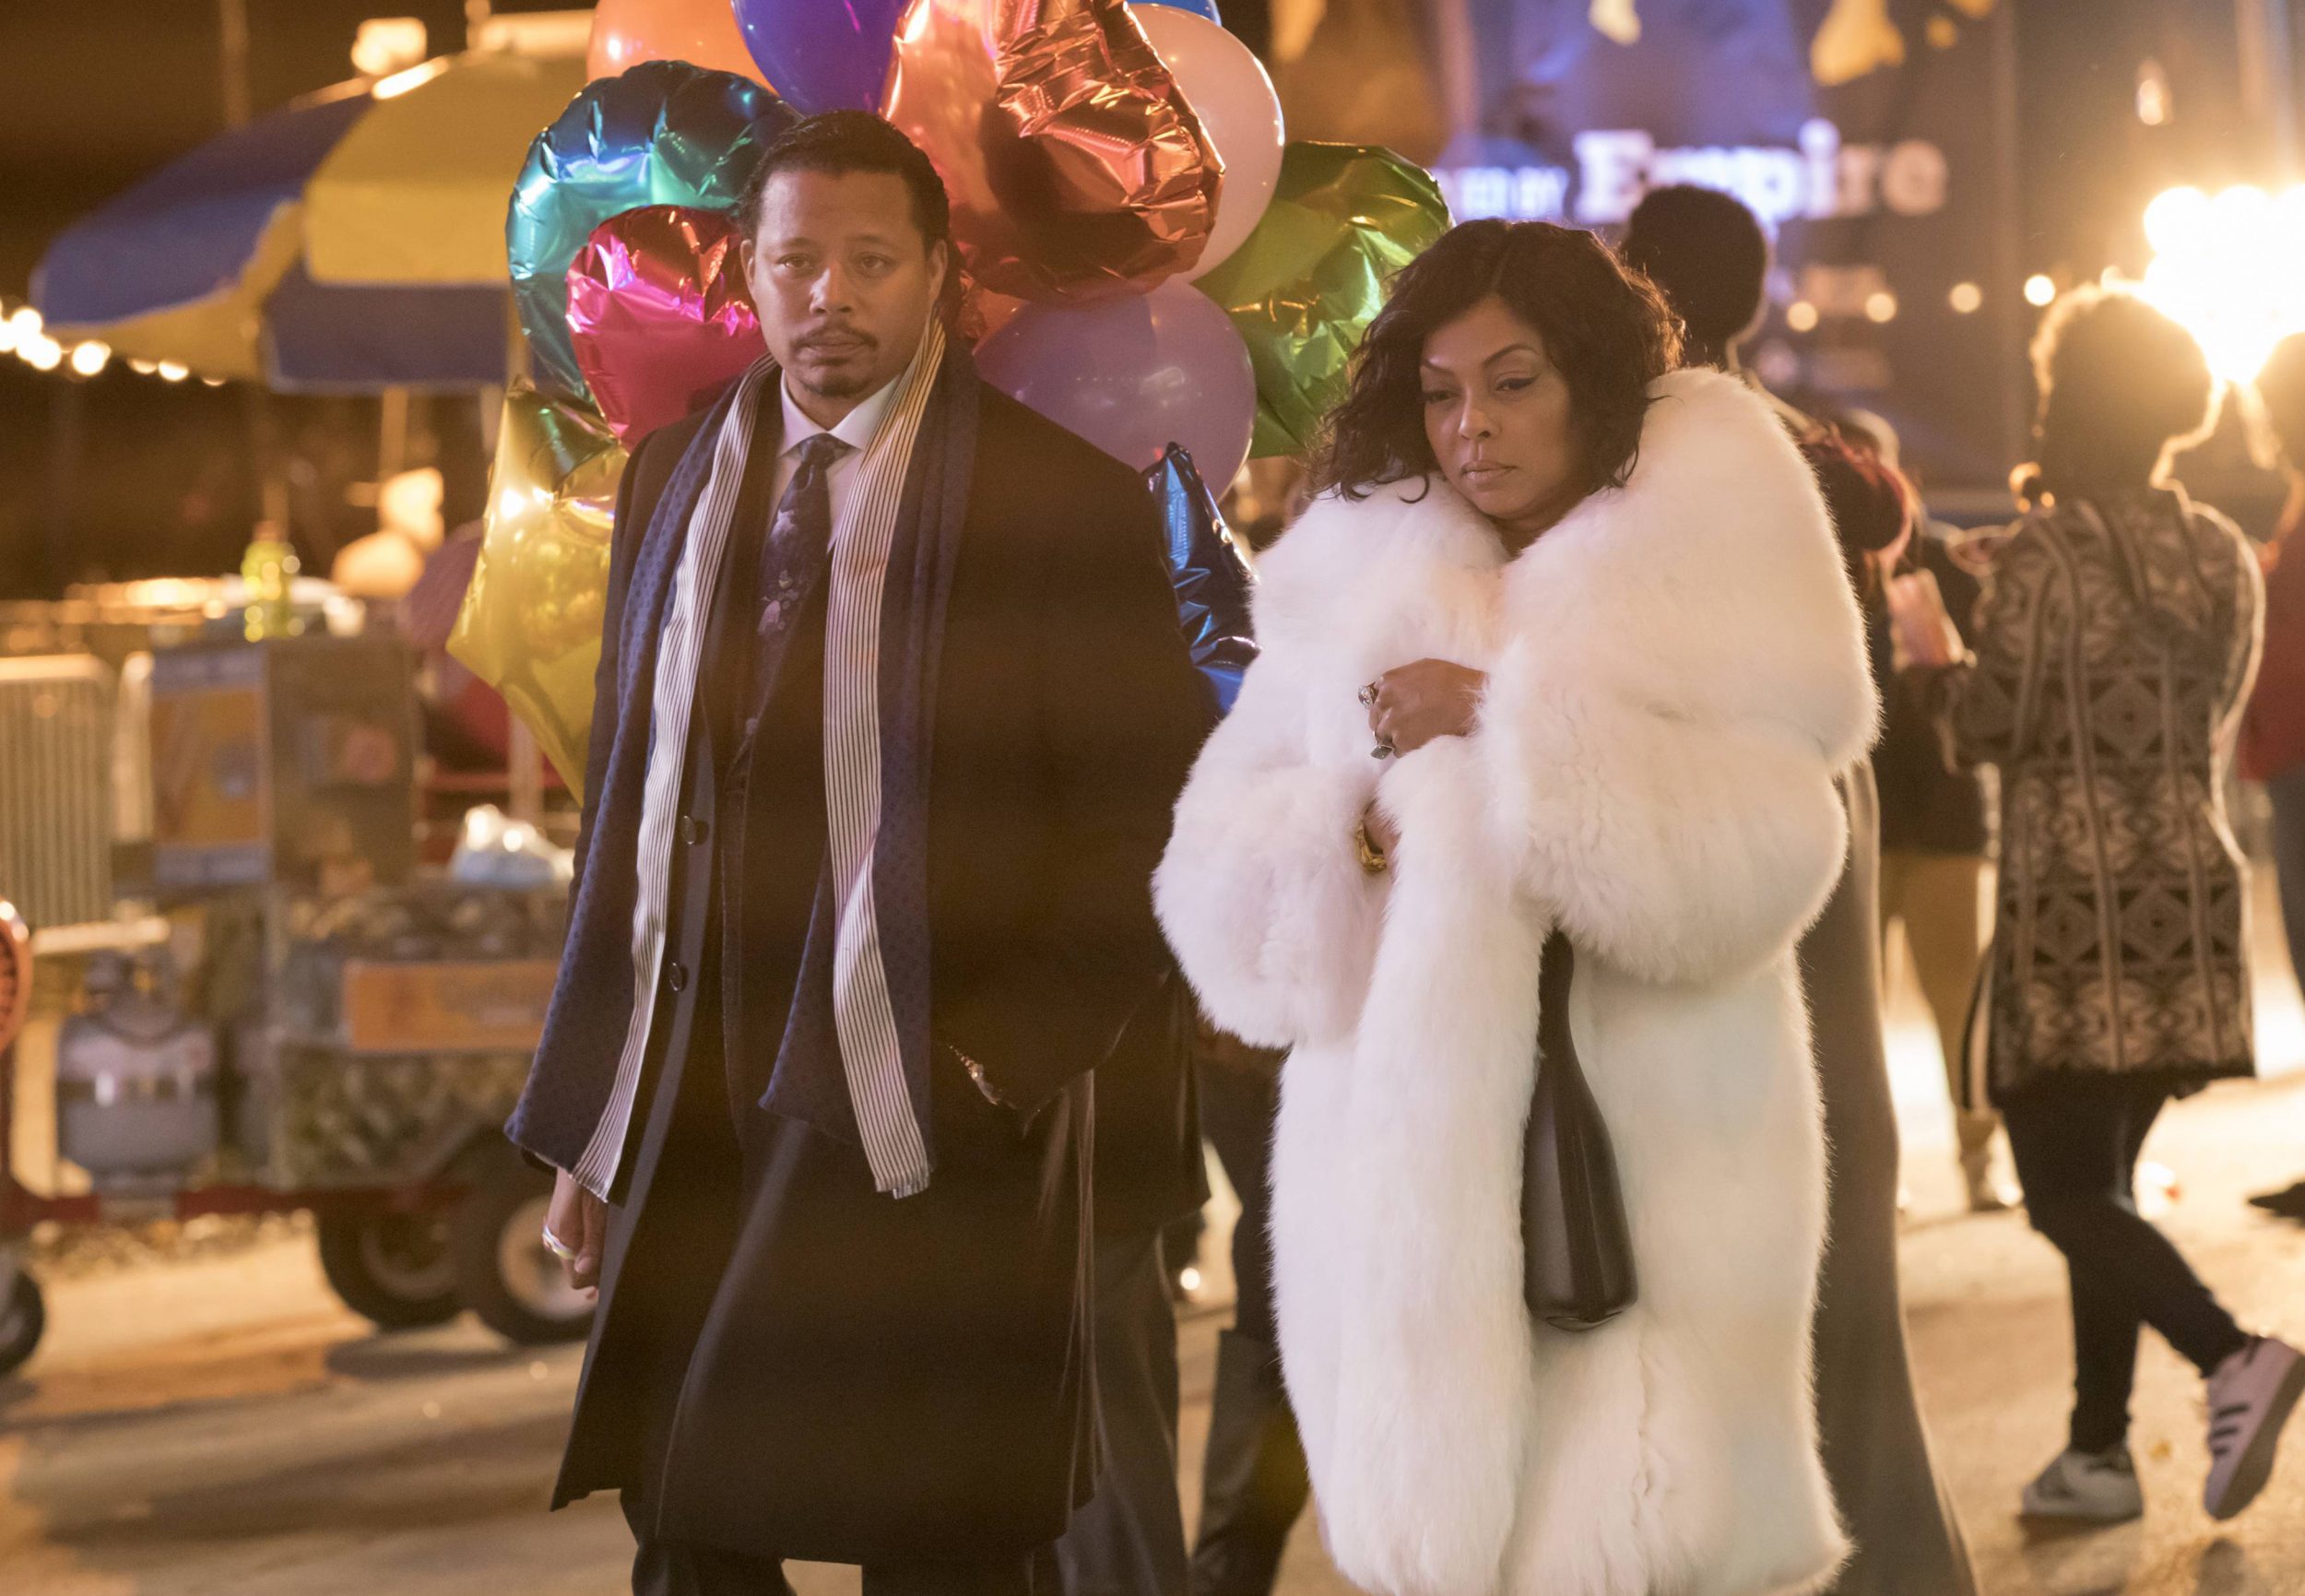 EMPIRE: Pictured L-R: Terrence Howard and Taraji P. Henson in the "A Furnace For your Foe" fall finale episode of EMPIRE airing Dec. 14 (8:00-9:00 PM ET/PT) on FOX. ©2016 Fox Broadcasting Co. CR: Chuck Hodes/FOX